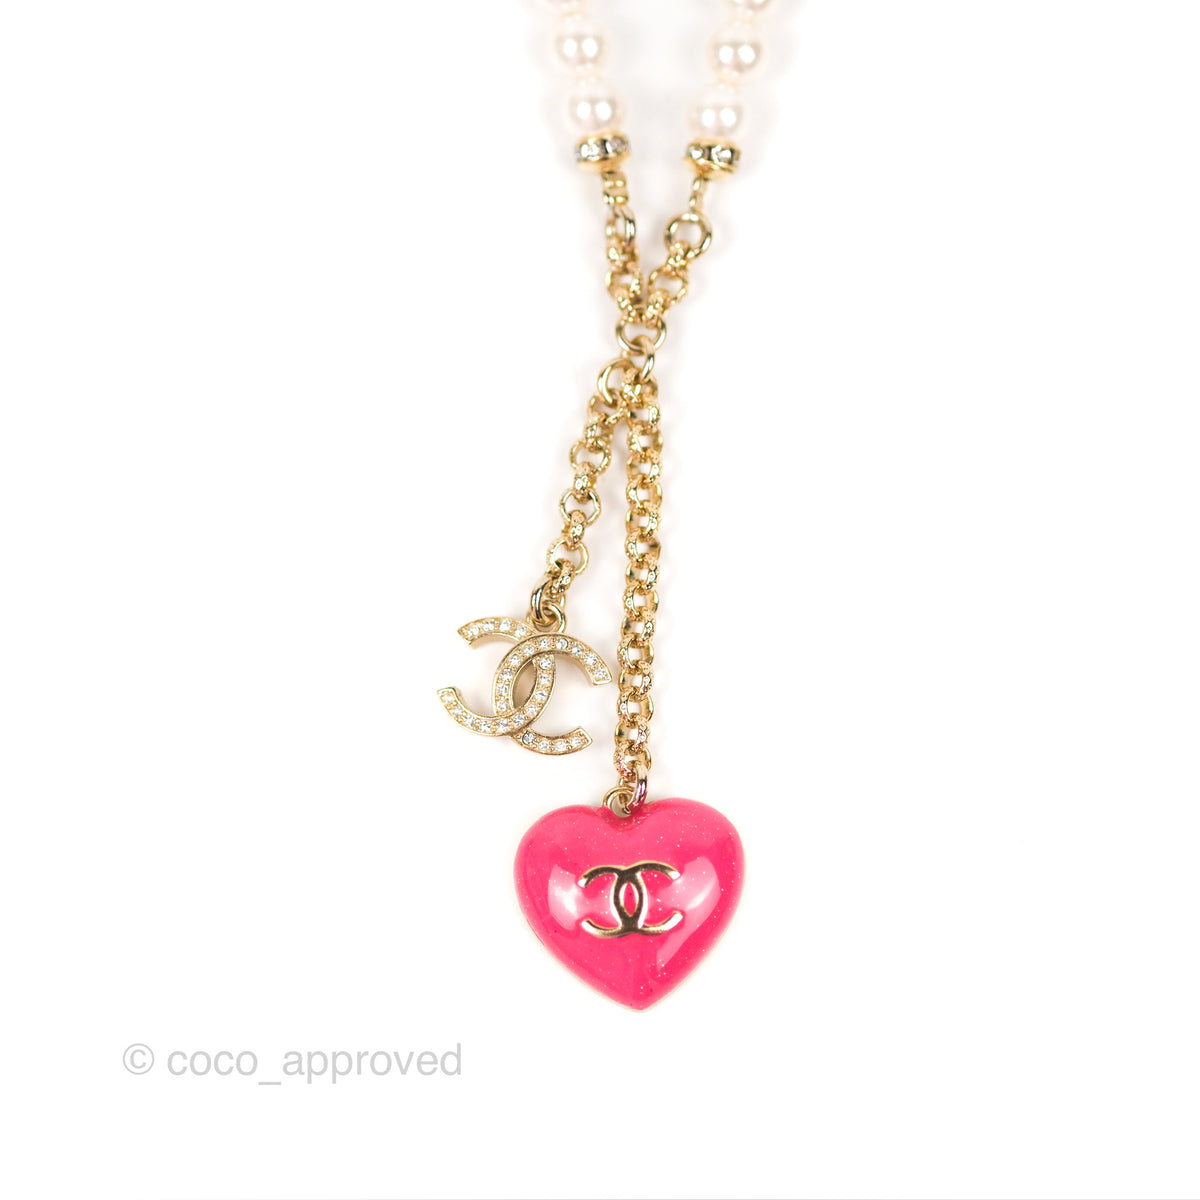 Chanel Enamel CC Necklace Pink Pendant Gold Tone 17A – Coco Approved Studio